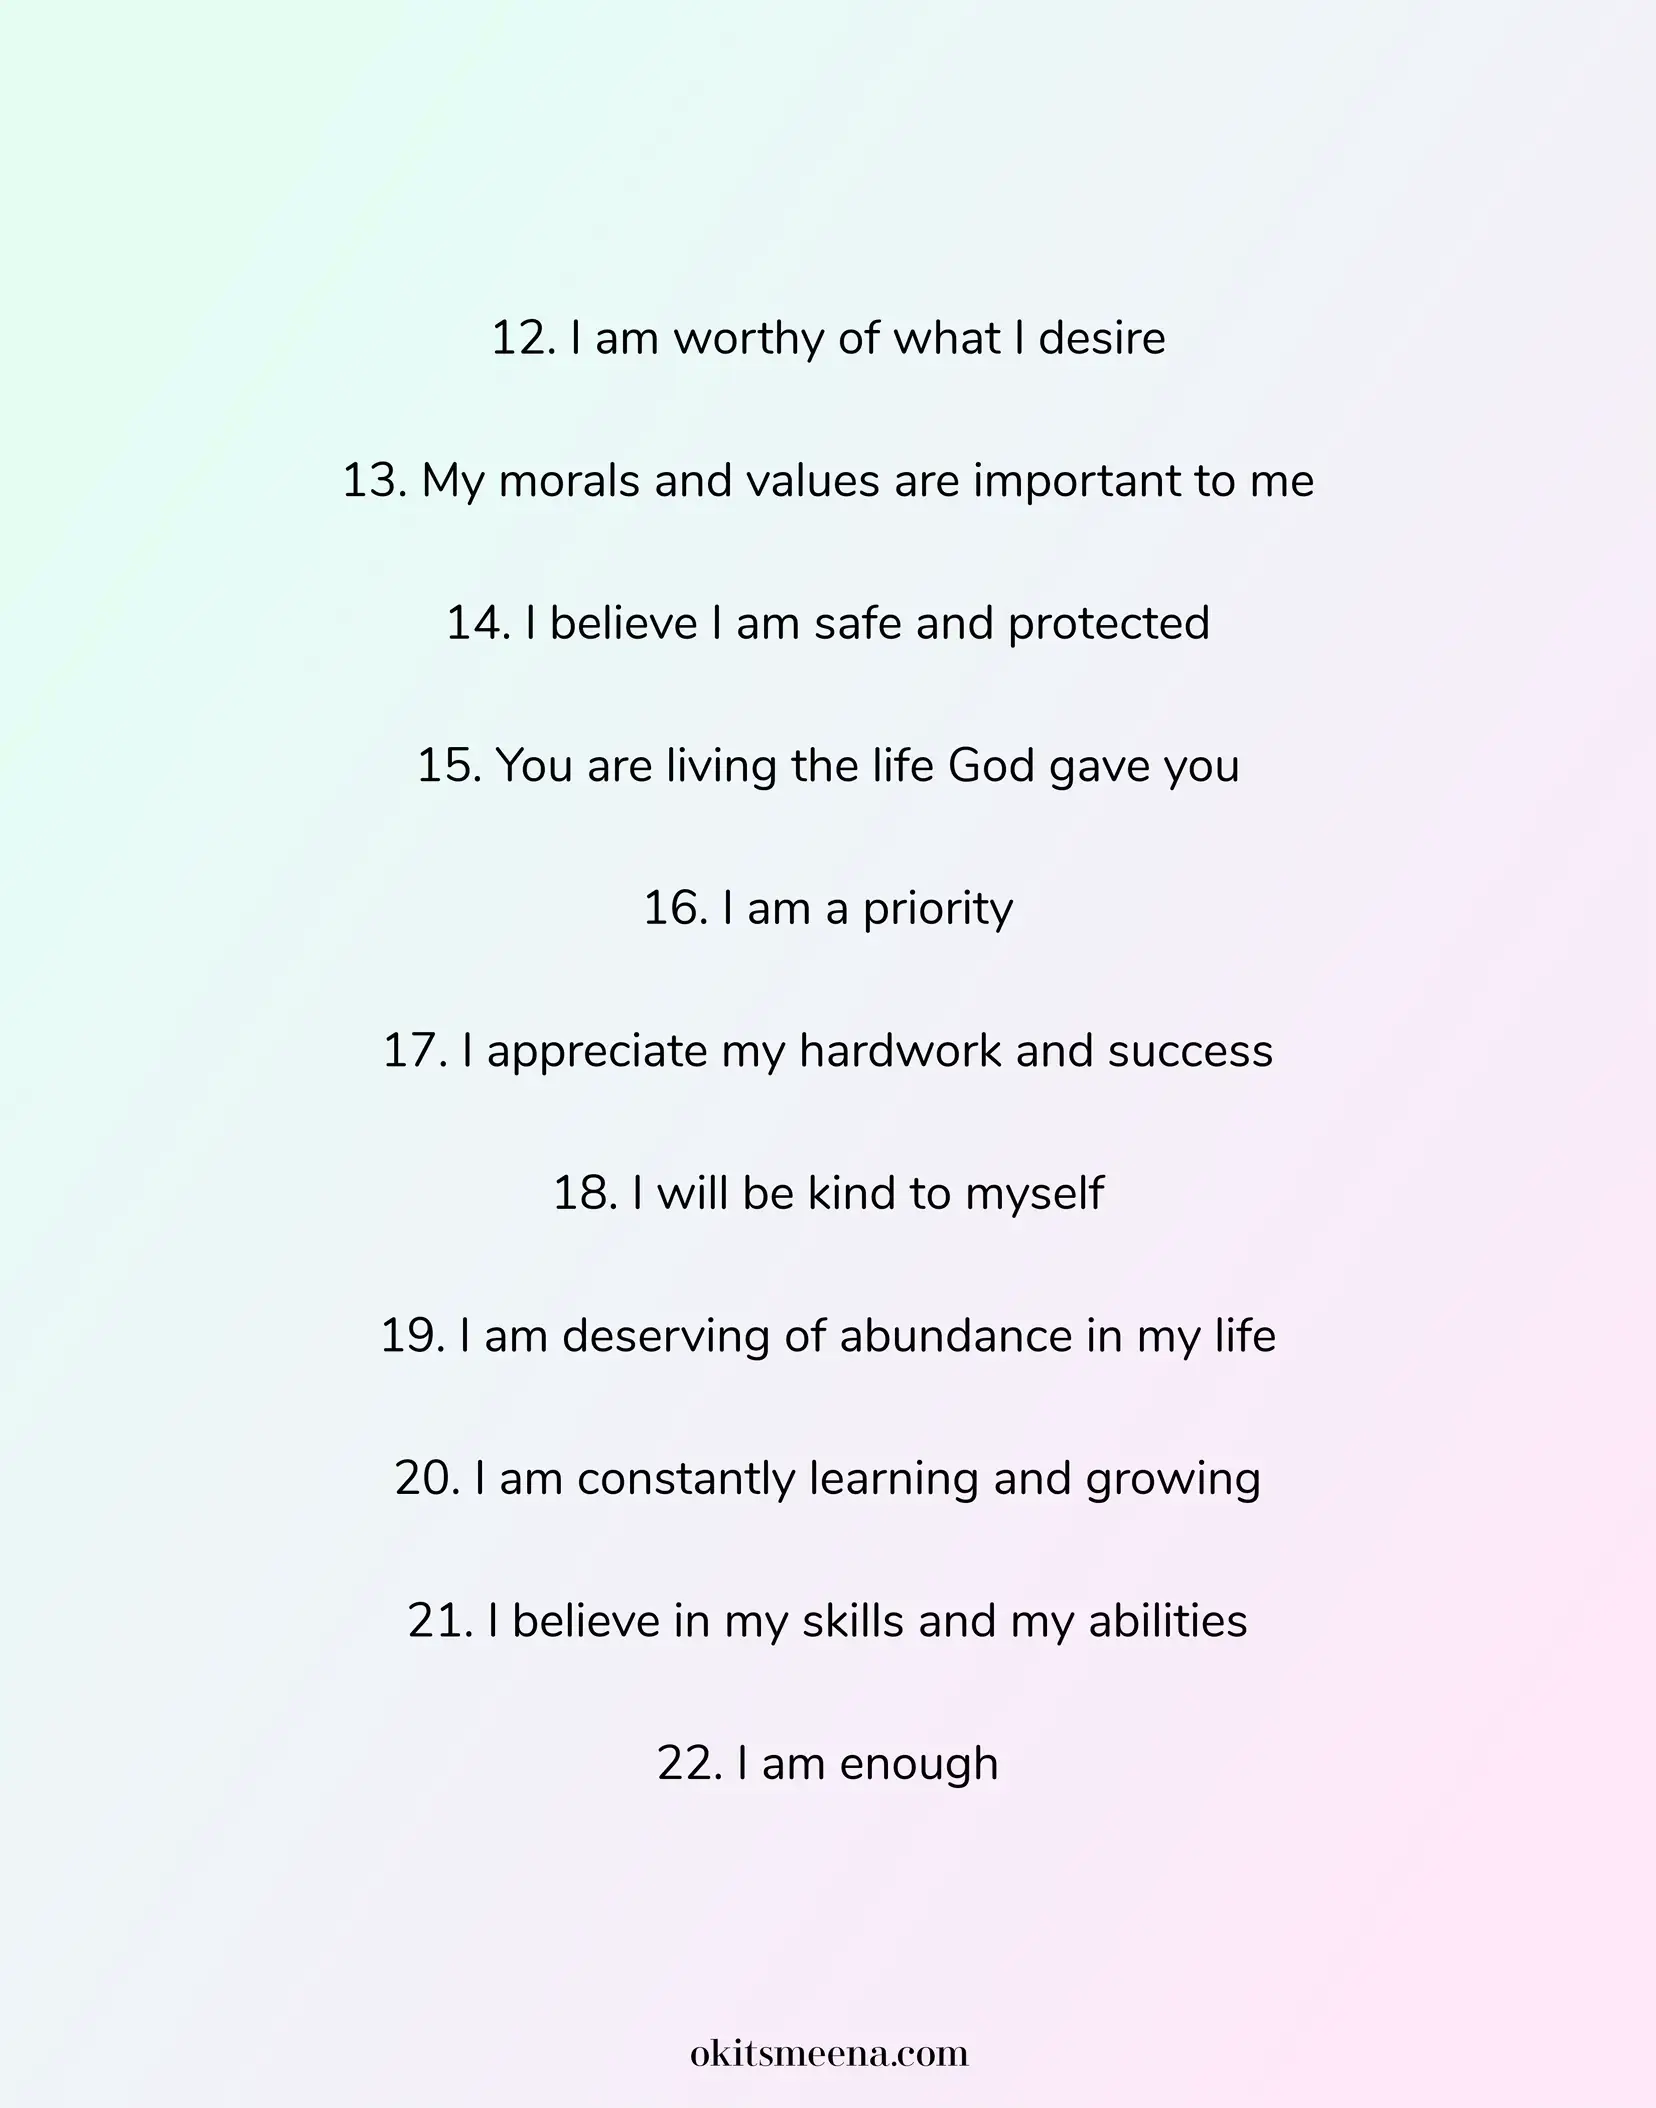  A list of positive affirmations